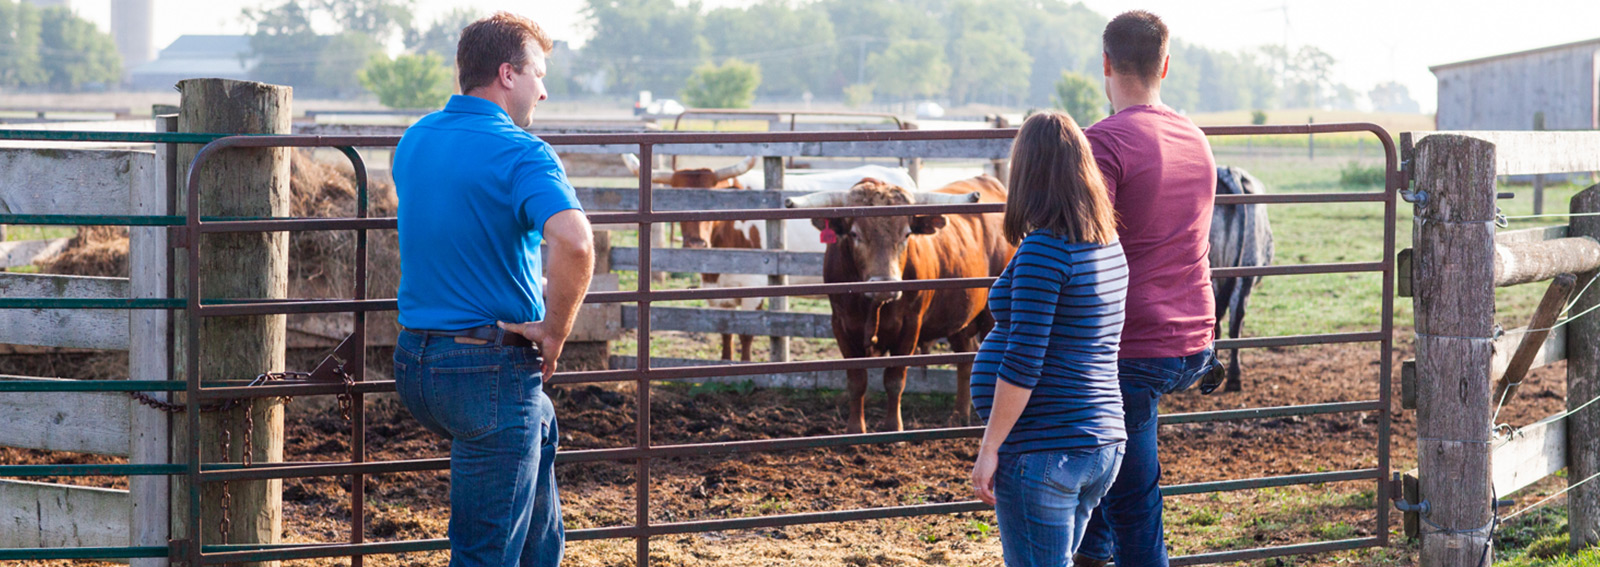 Two men and one woman conversating outside of a cow pen